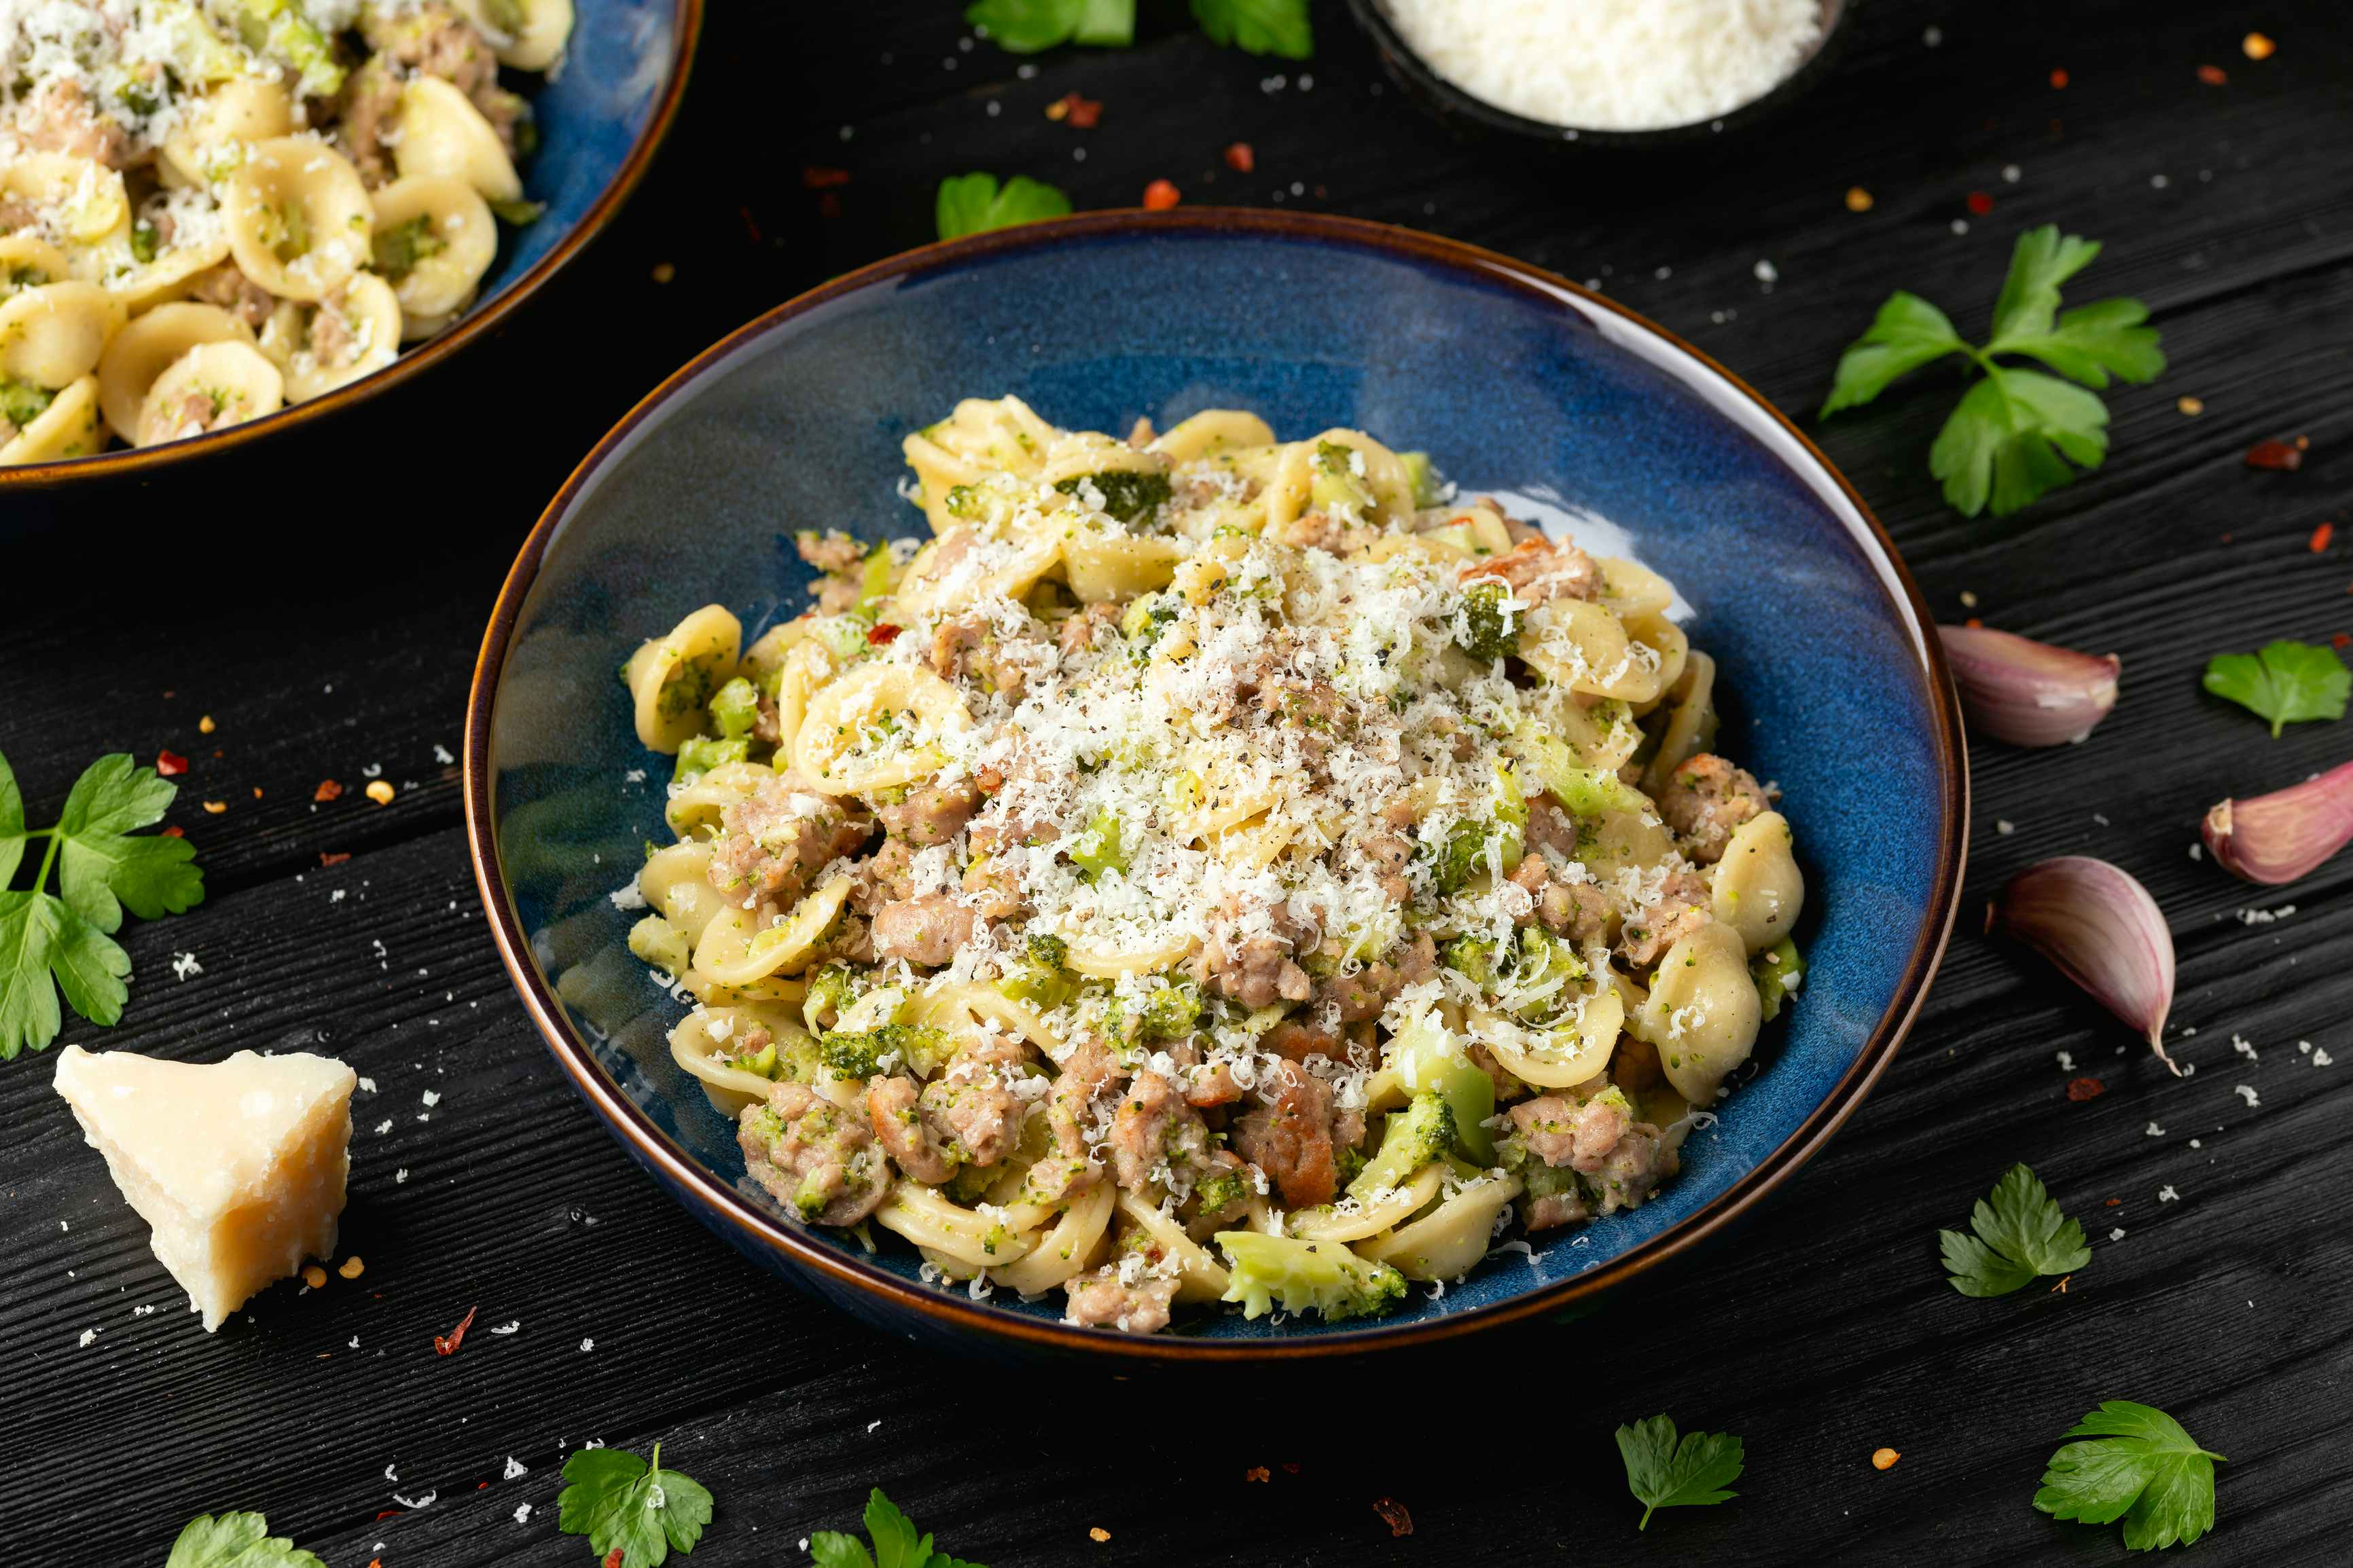 Orecchiate pasta with broccoli and sausage covered in parmesean cheese